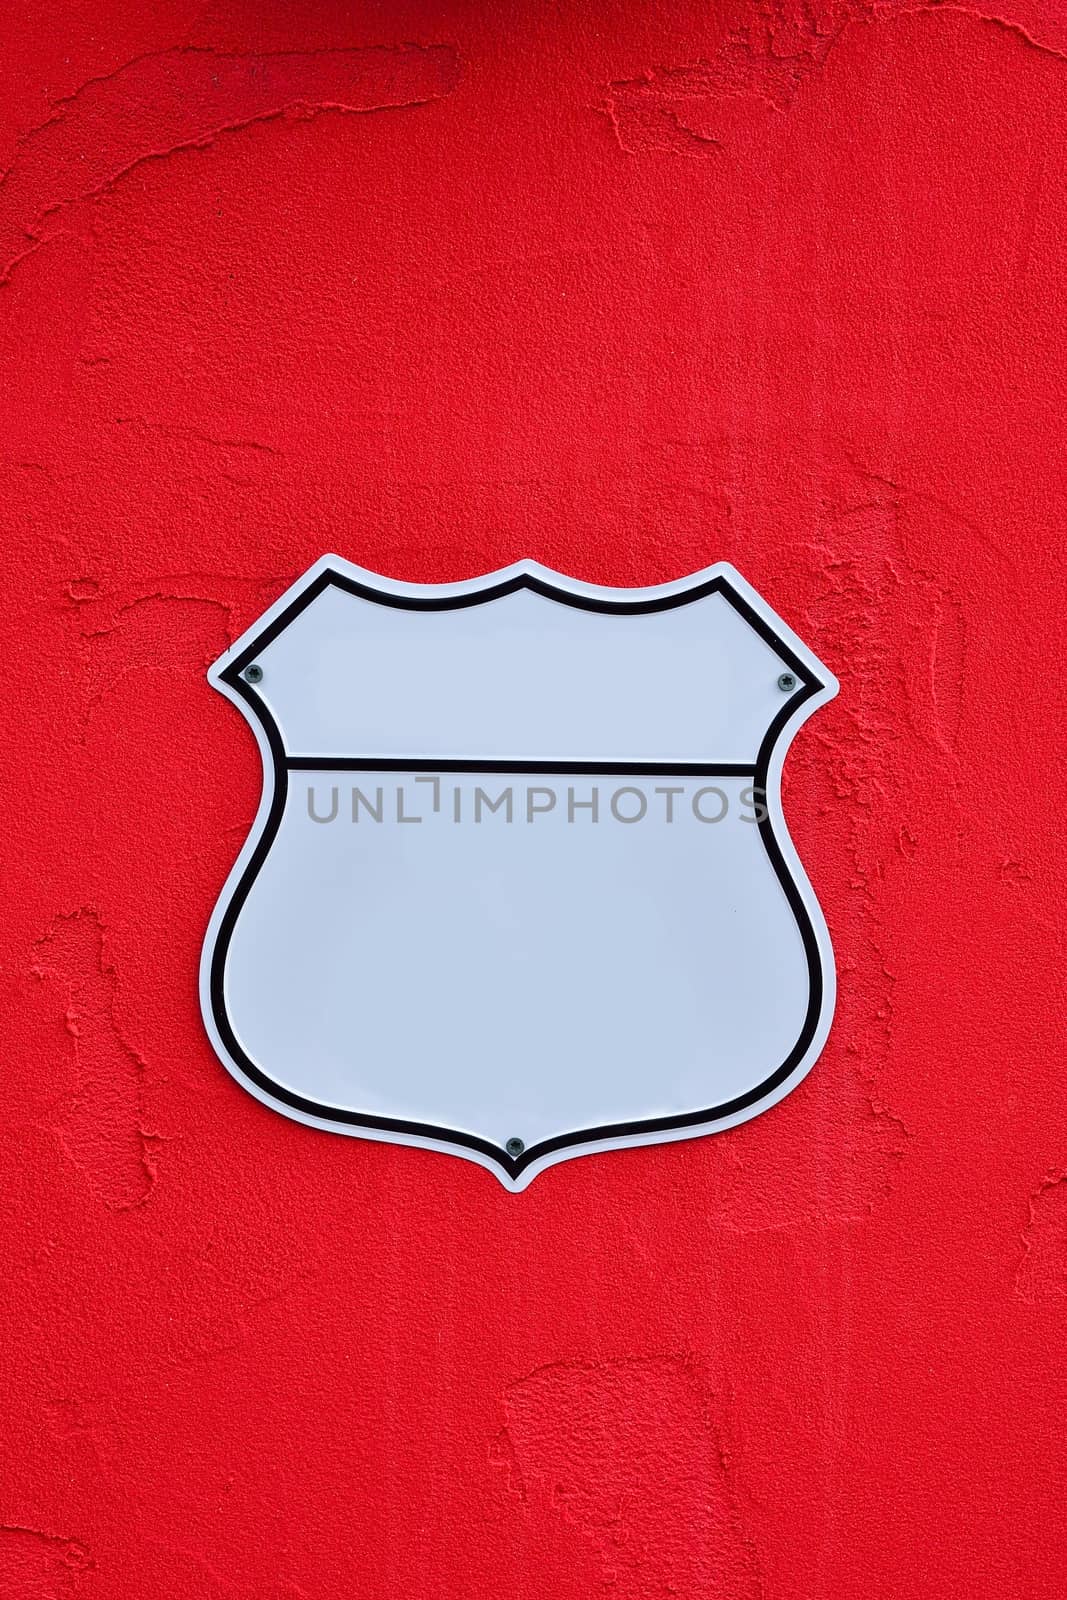 American interstate highway road shield with a white background.